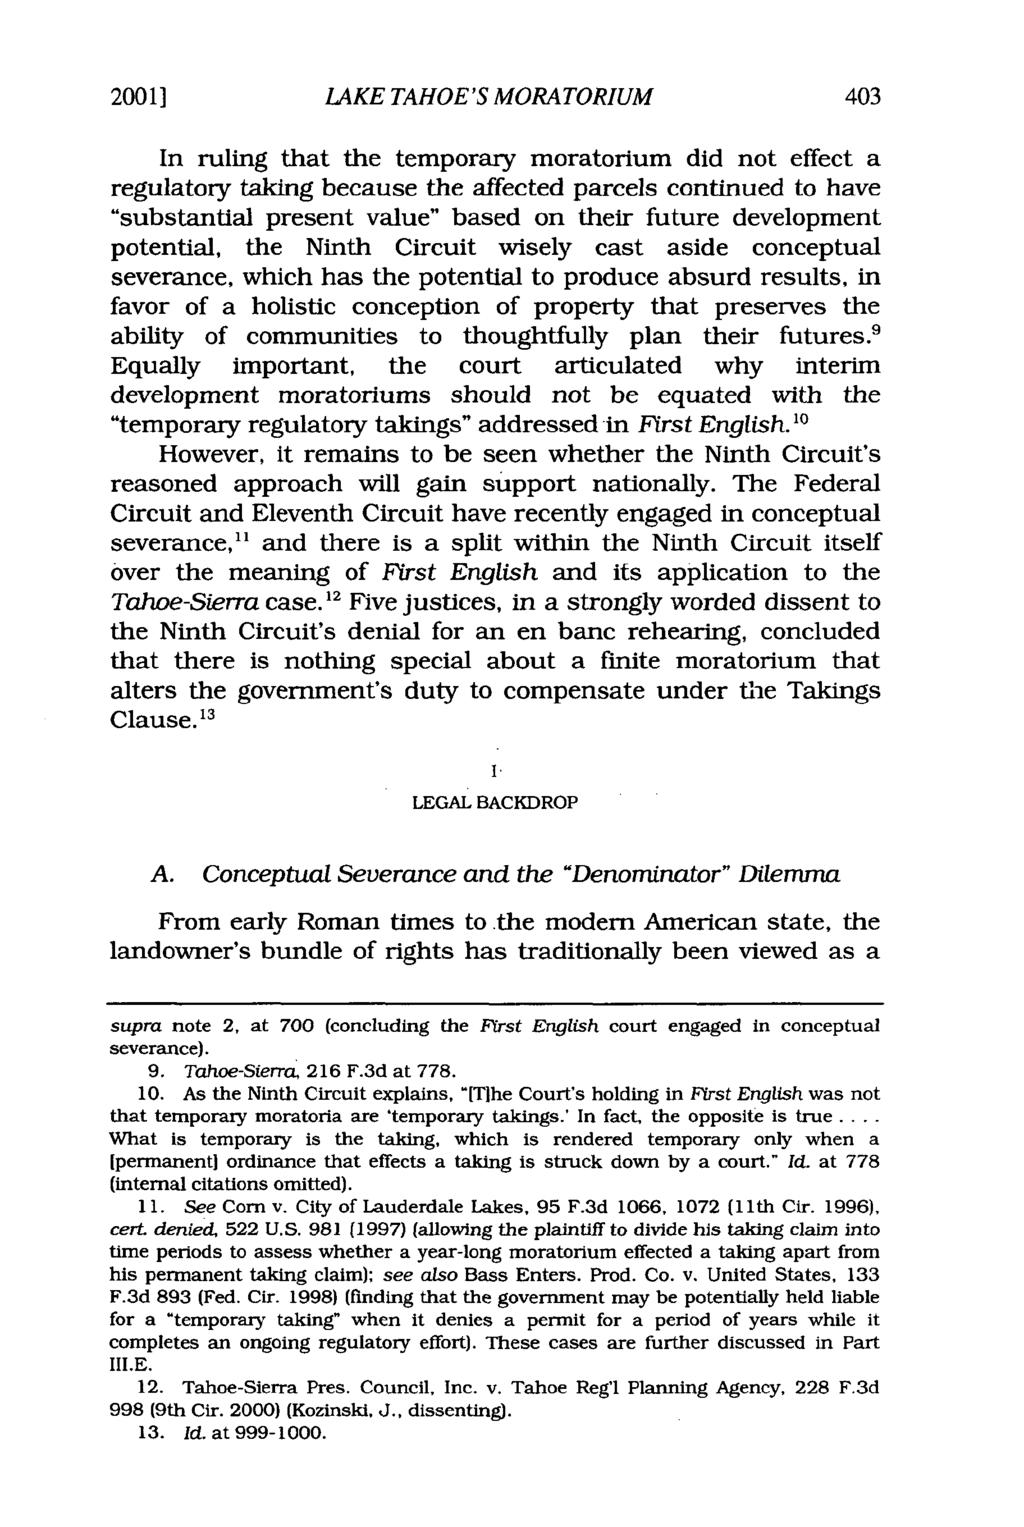 20011 LAKE TAHOE'S MORATORIUM In ruling that the temporary moratorium did not effect a regulatory taking because the affected parcels continued to have "substantial present value" based on their